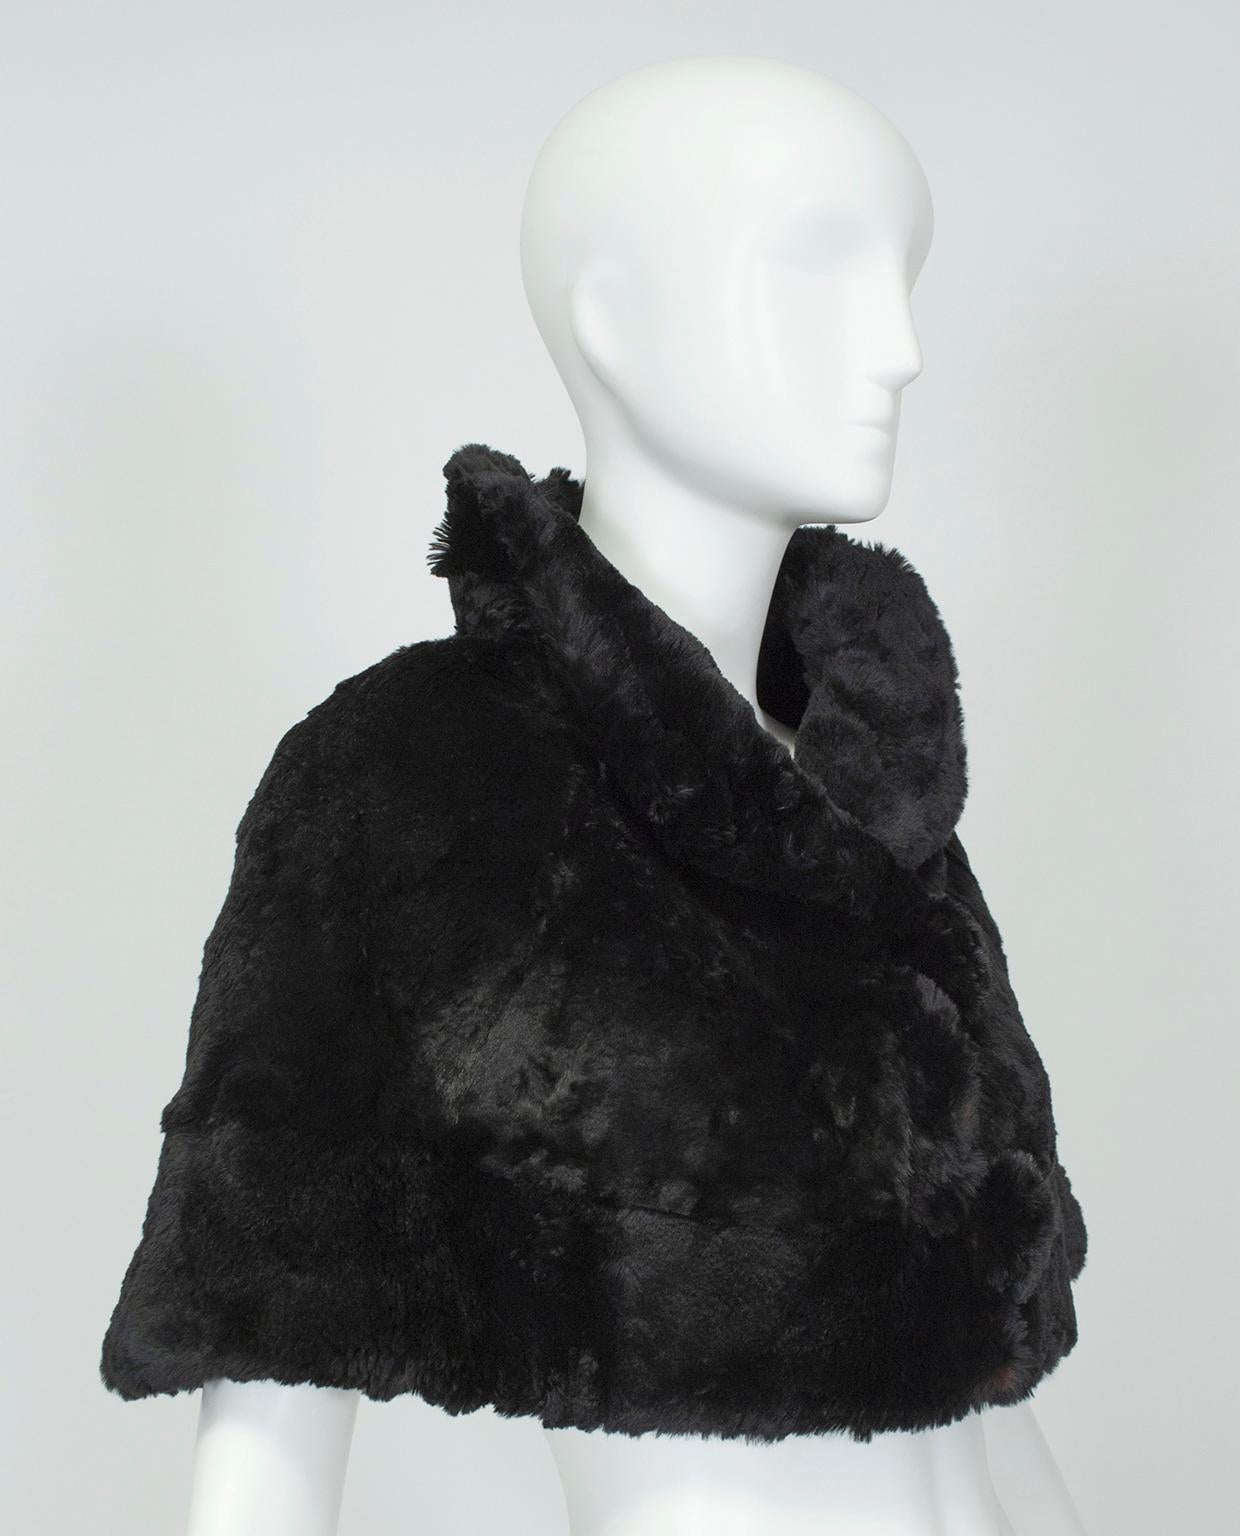 As timeless as a set of pearls, fur stoles evoke ladylike elegance and remain essential-wearing with strapless dresses. Though it is black, this one is anything but basic thanks to its tidy shawl collar, charming self trim and playful oversized pom